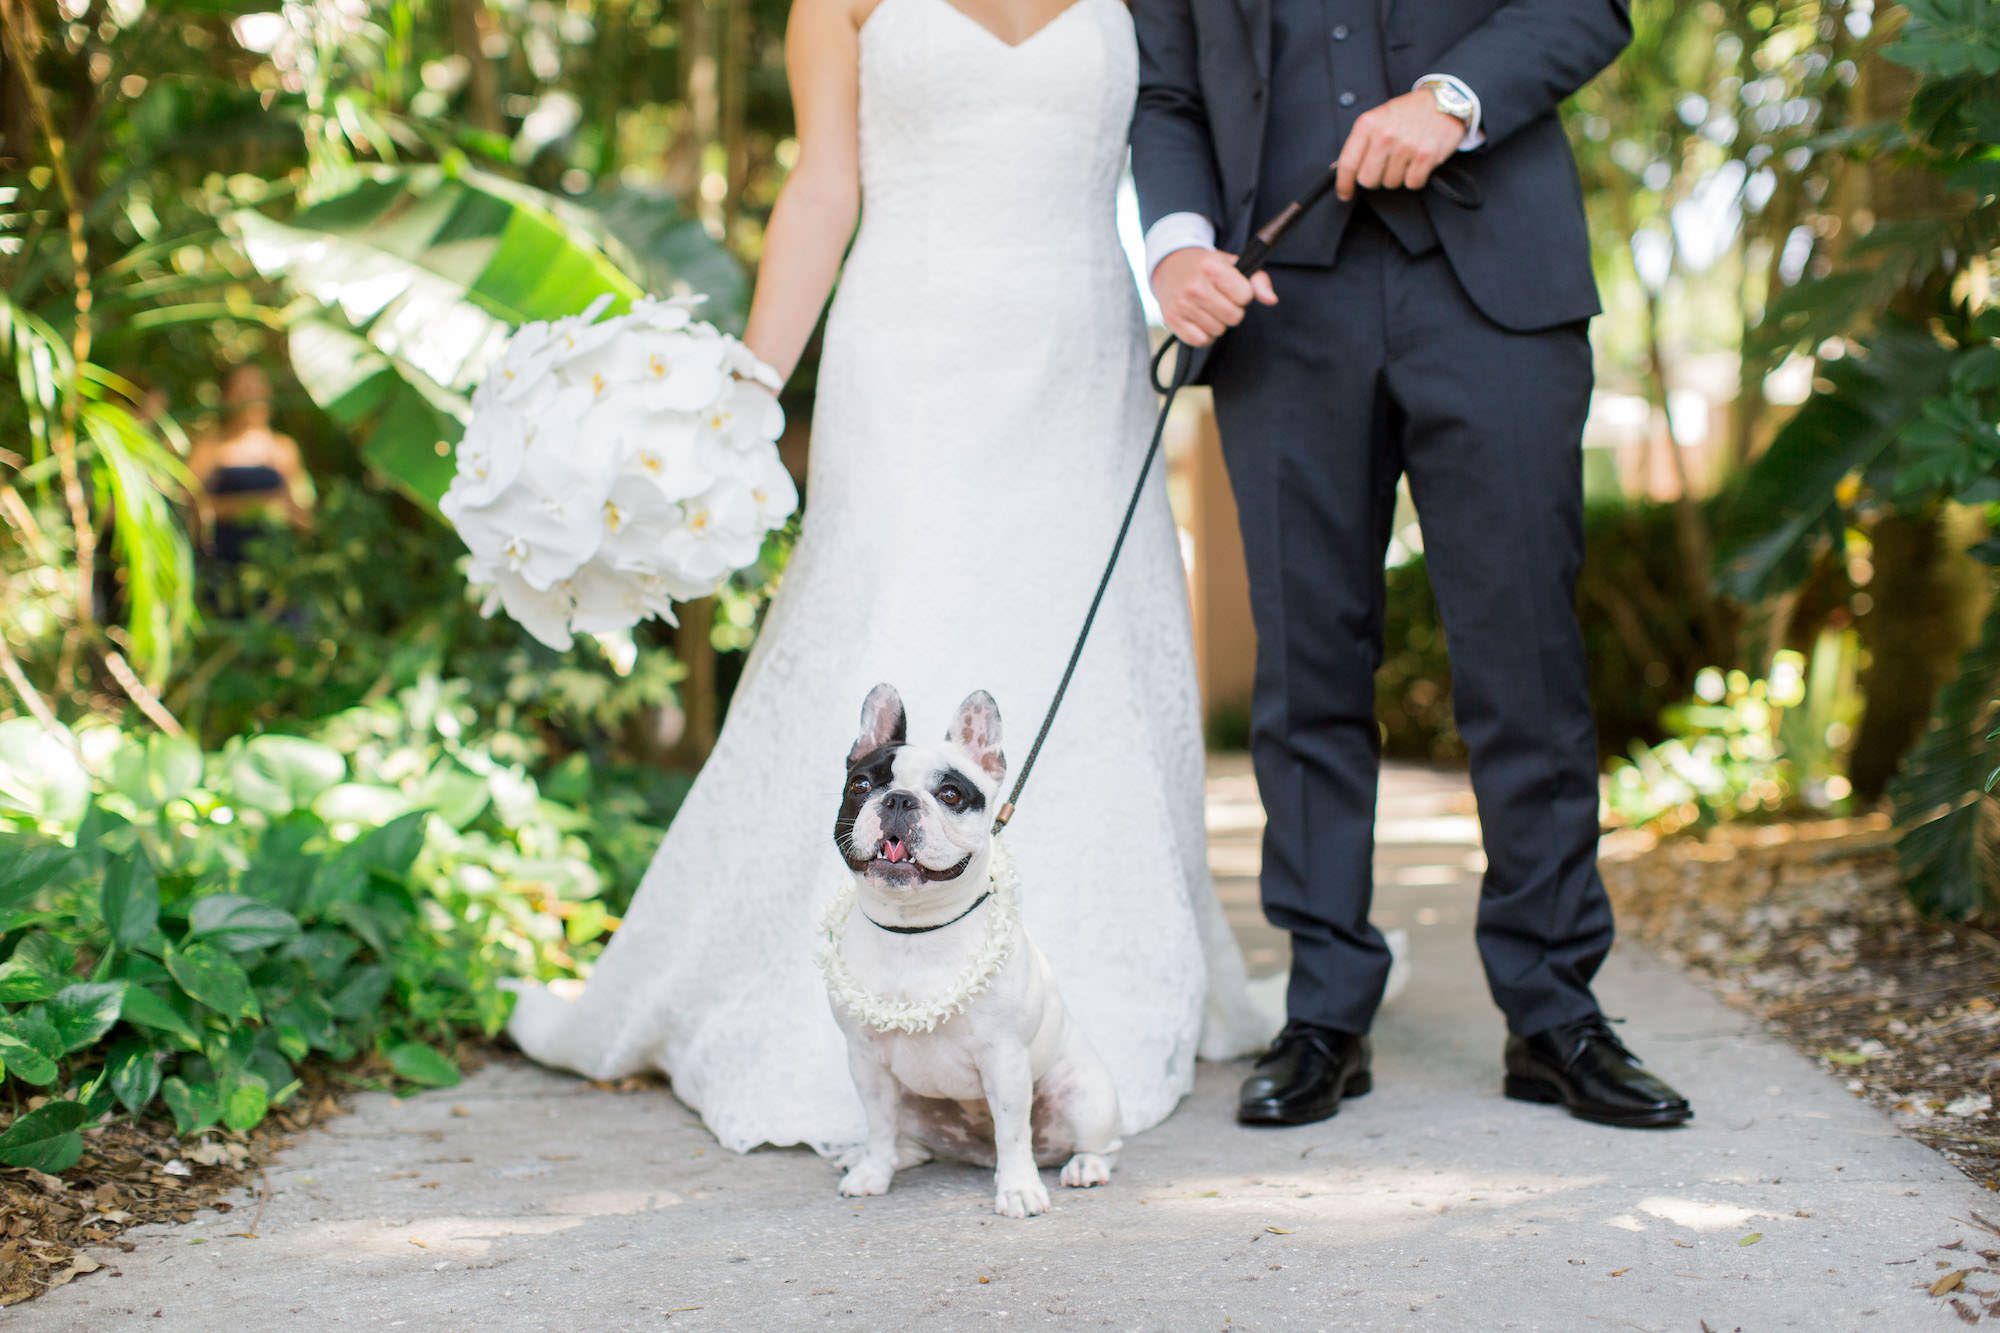 Timeless Classic Bride and Groom with French Bulldog Wedding Portrait | Tampa Bay Wedding Pet Planner FairyTail Pet Care